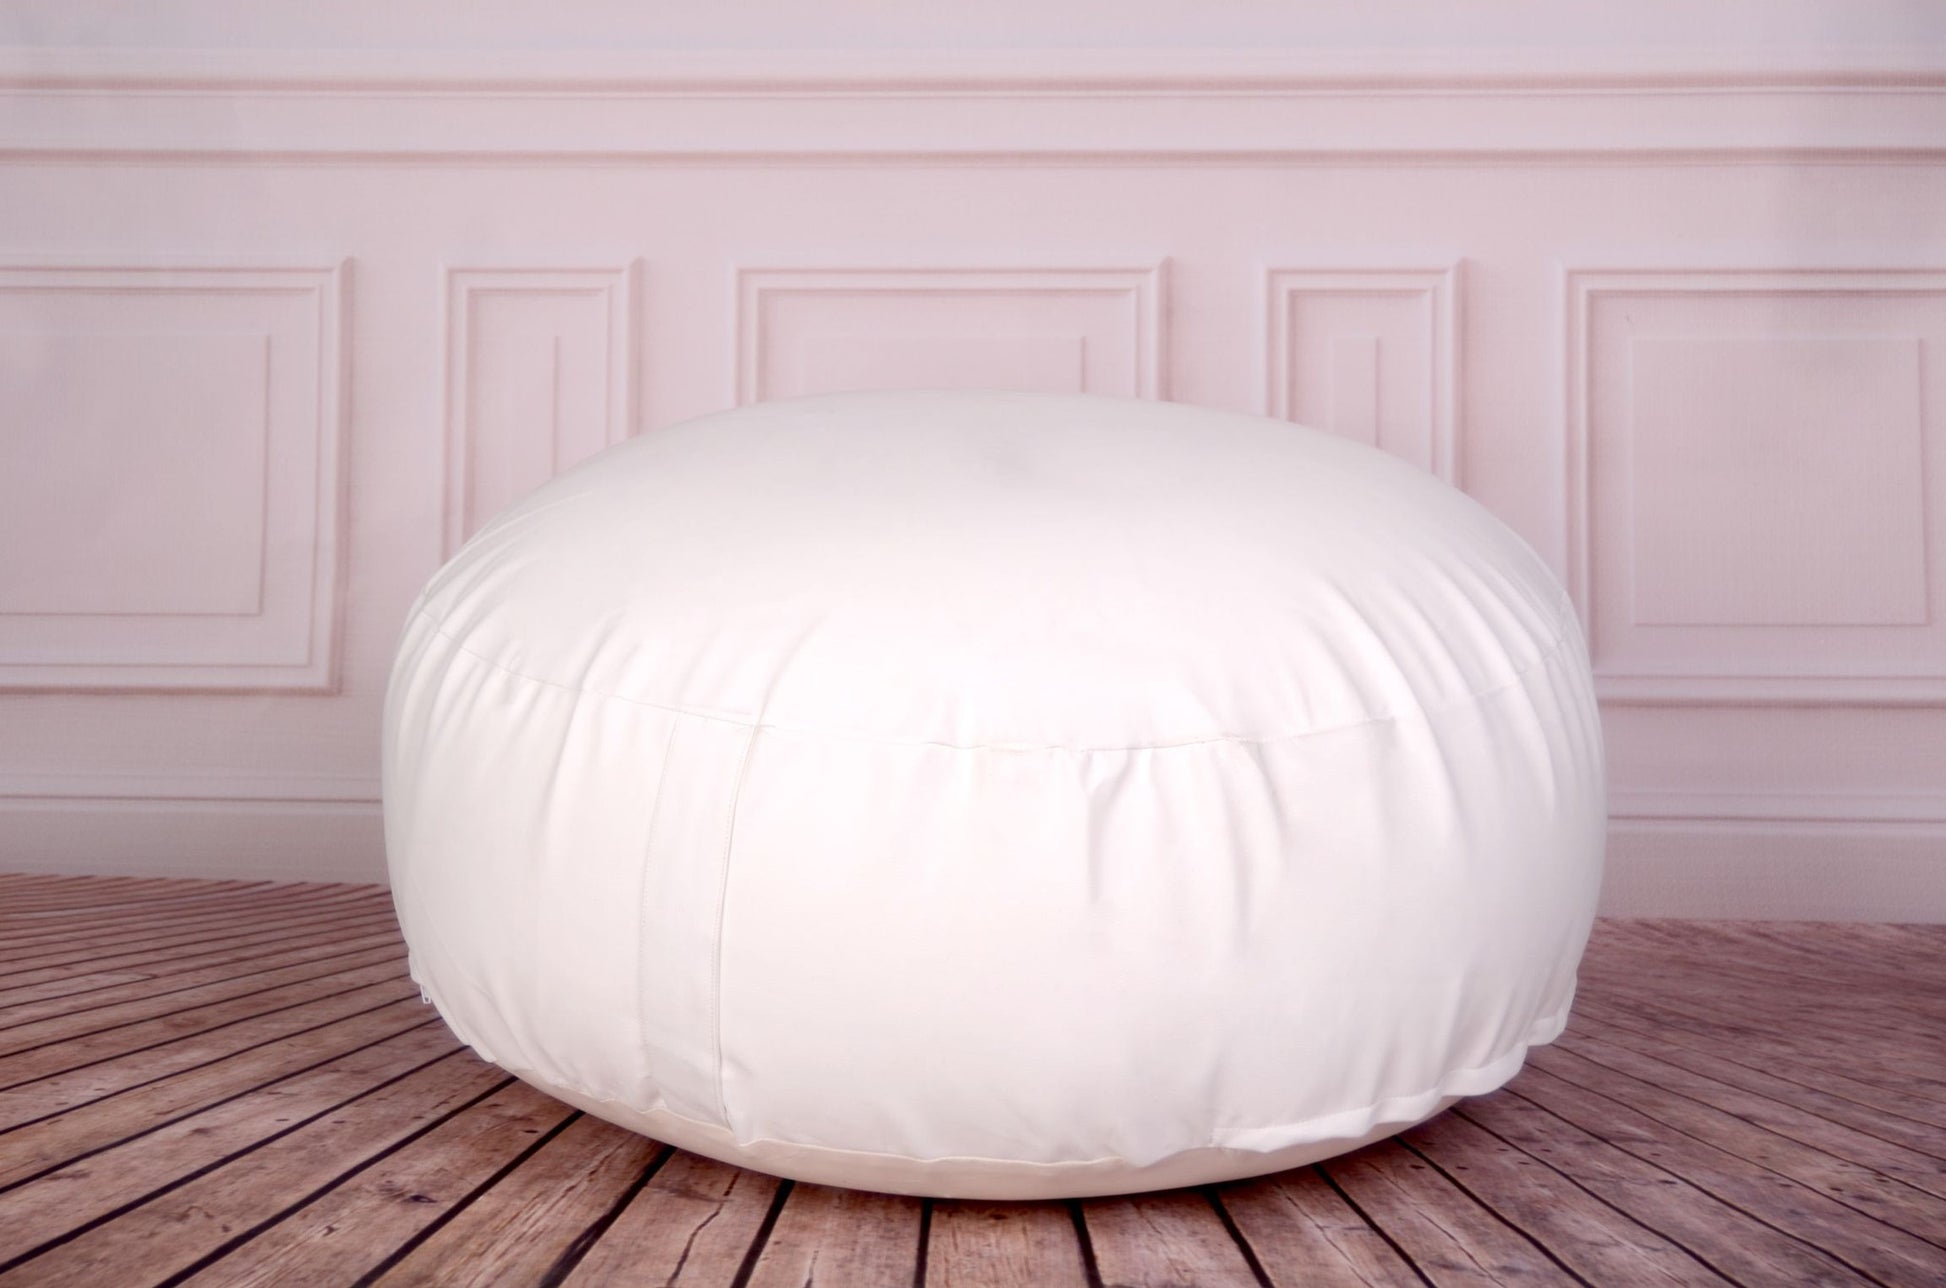 Posing Bean Bag for Newborn Photography 33in. diameter (unfilled)-Newborn Photography Props